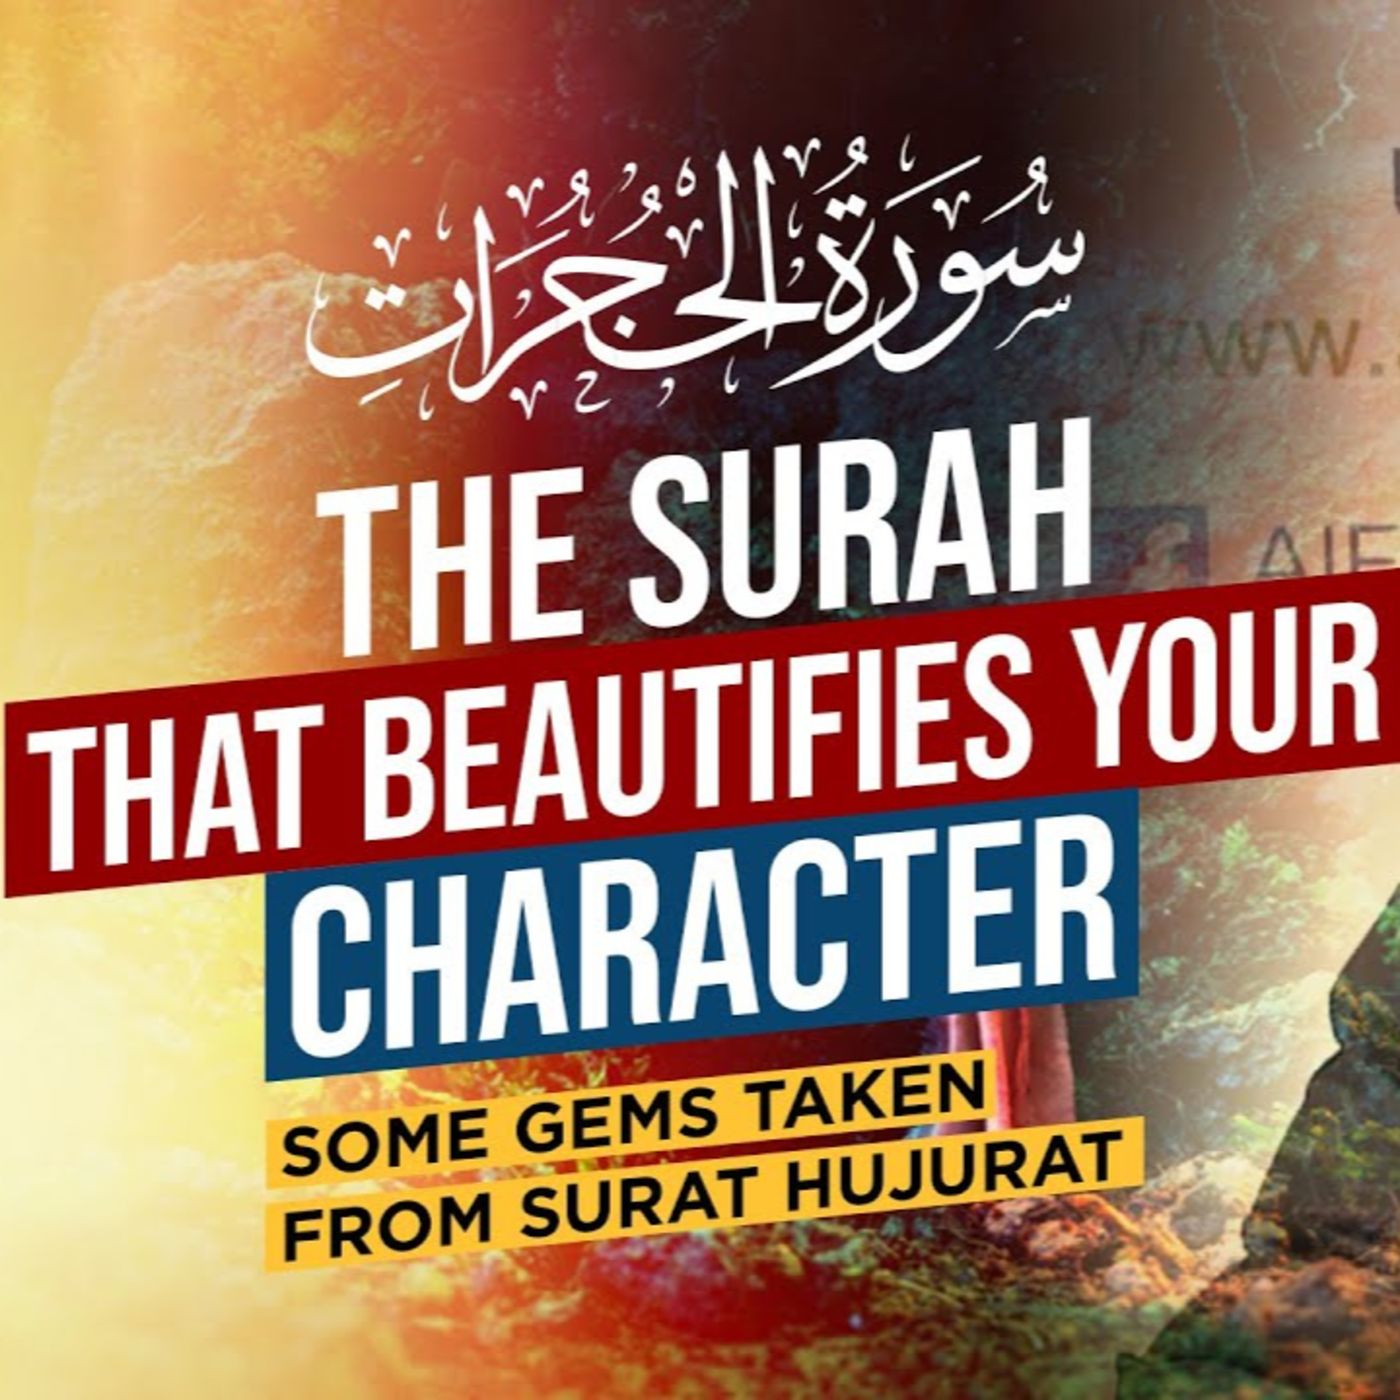 The Surah That Beautifies Your Character